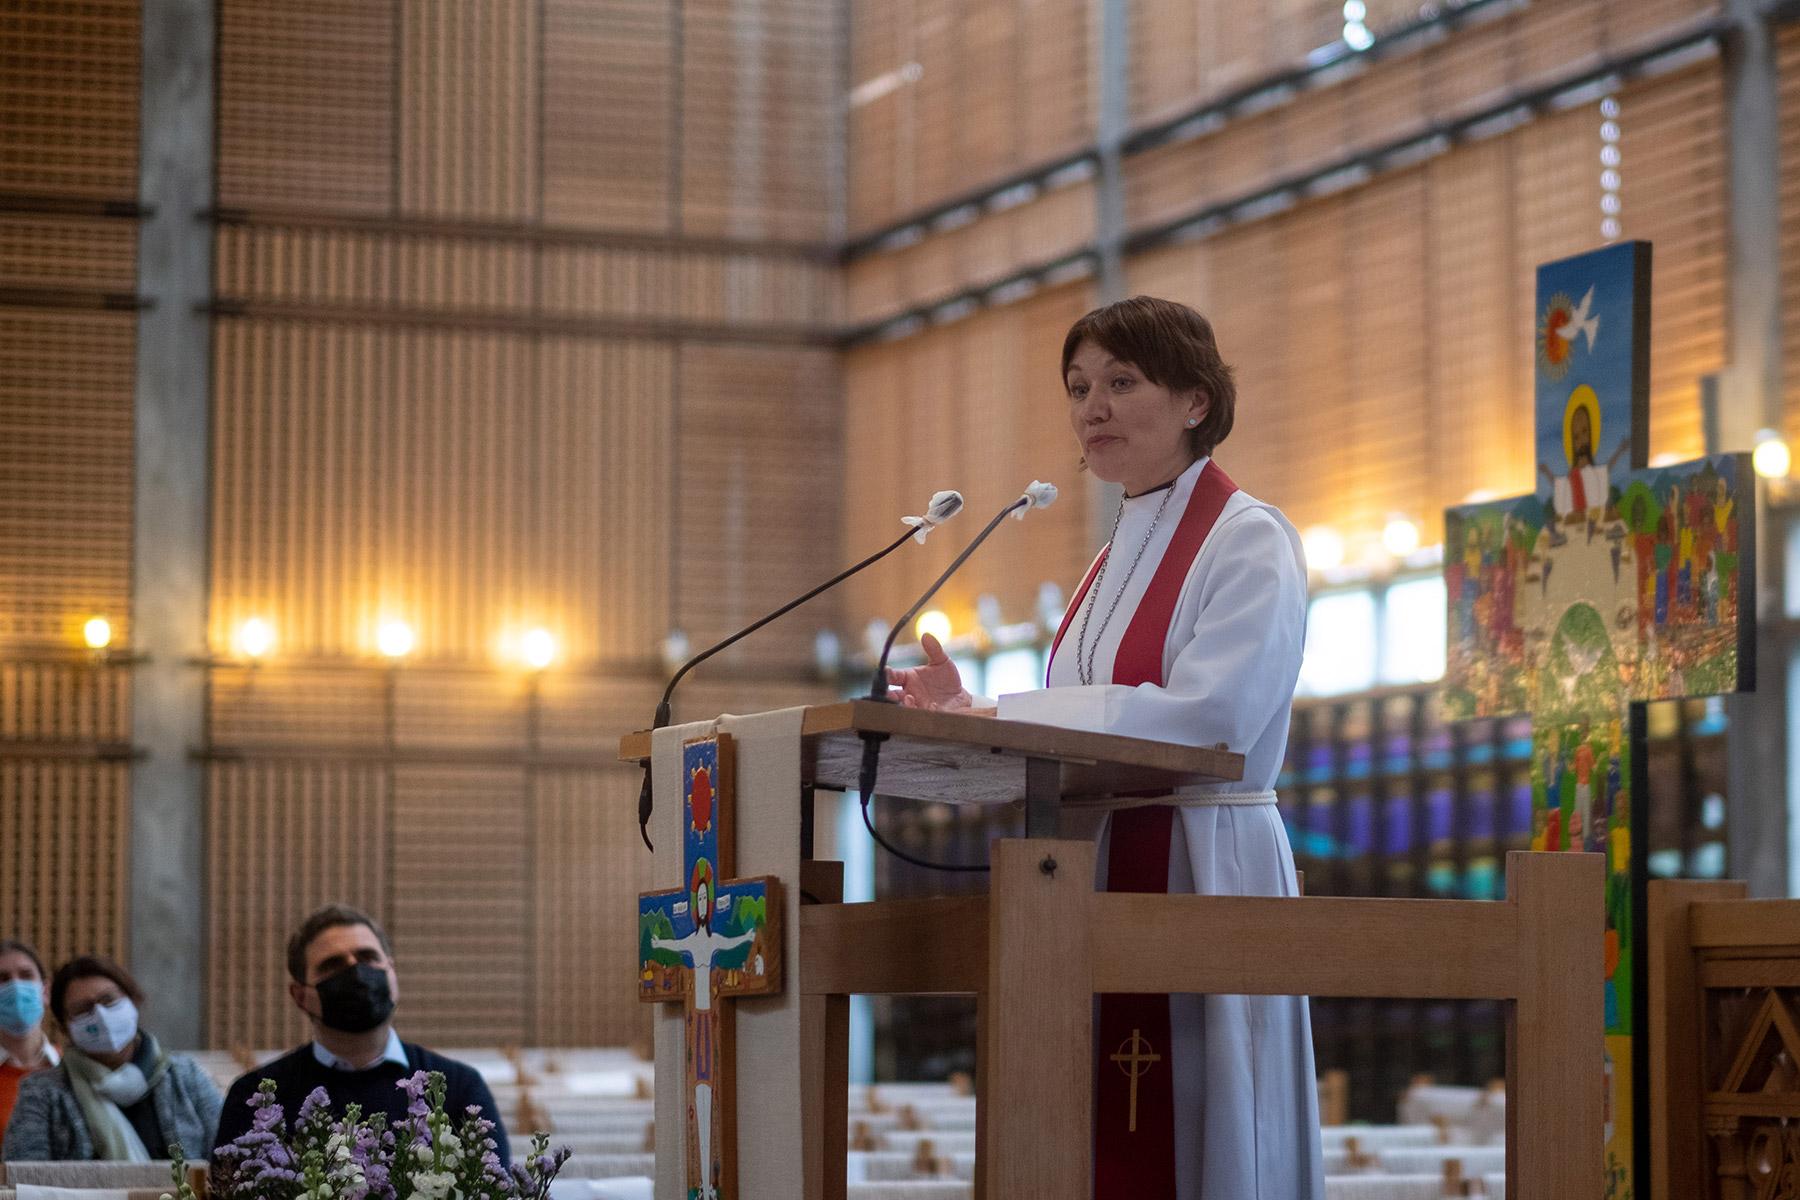 In her sermon, Burghardt reflected on the words of St Paul's letter to the Romans, urging Christians to be âtransformed by the renewing of your minds, so that you may discern what is the will of God.â Photo: LWF/M. Renaux 